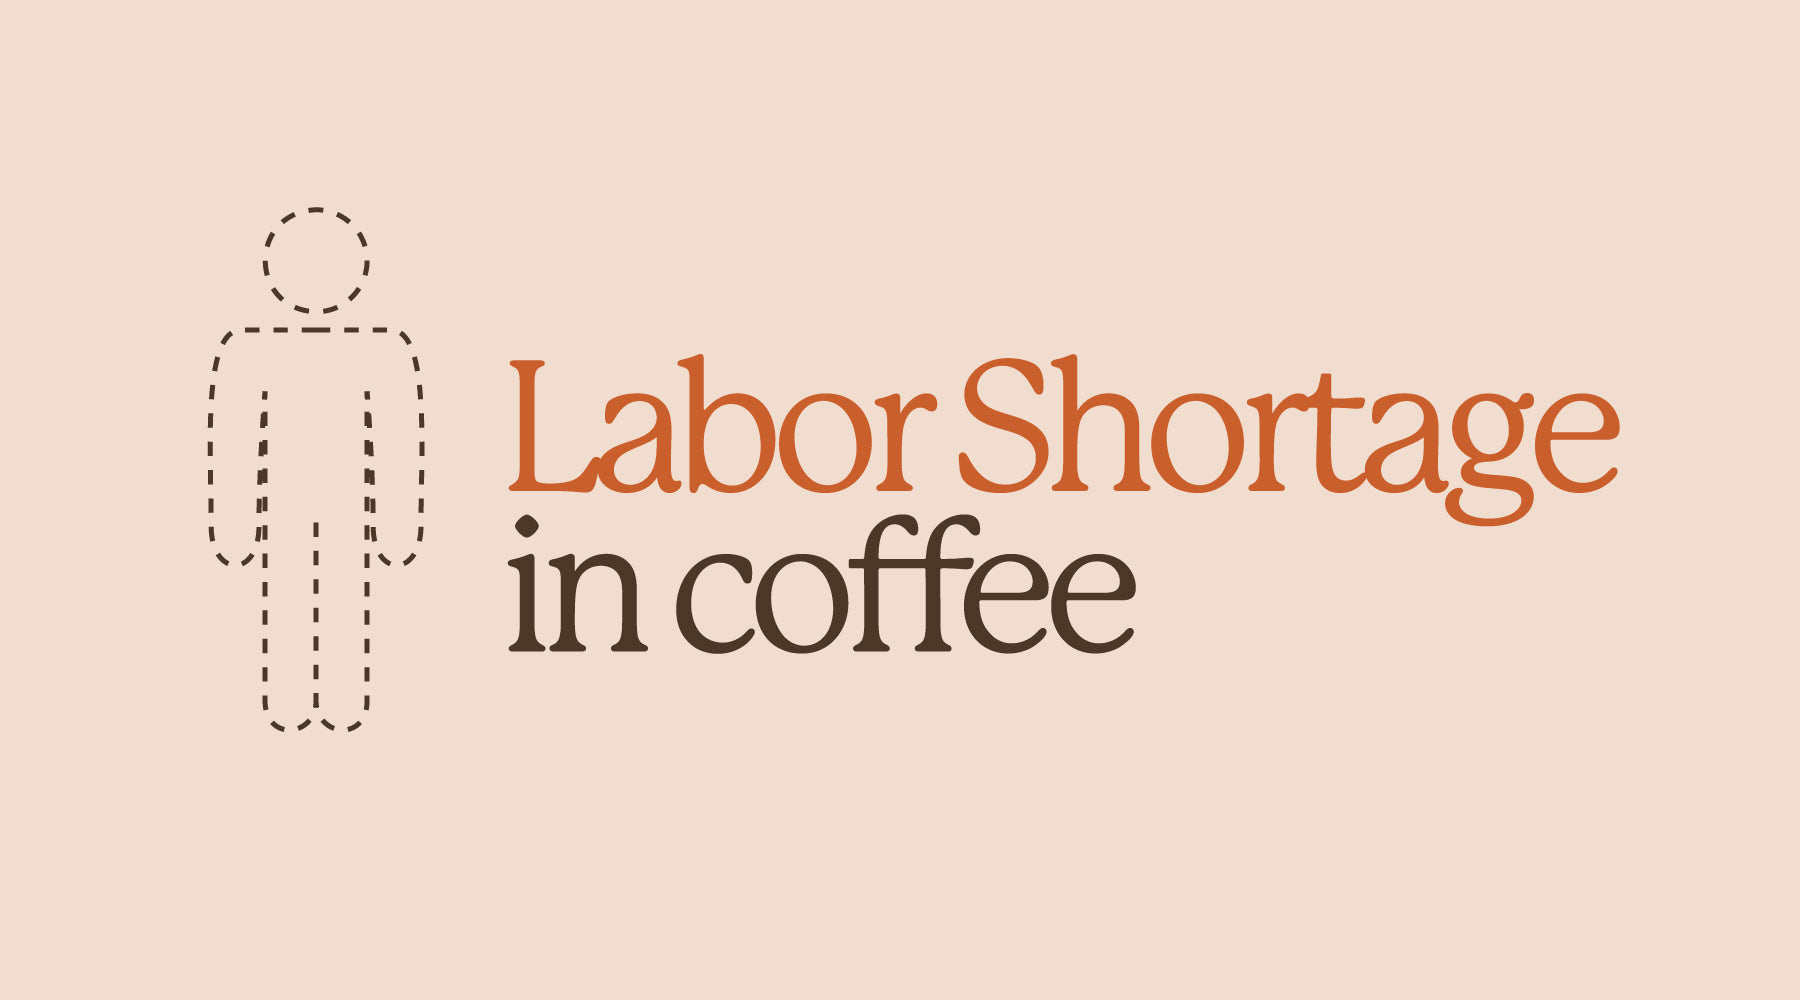 A Race Against Time | The Effects of Shortages in the Coffee Industry